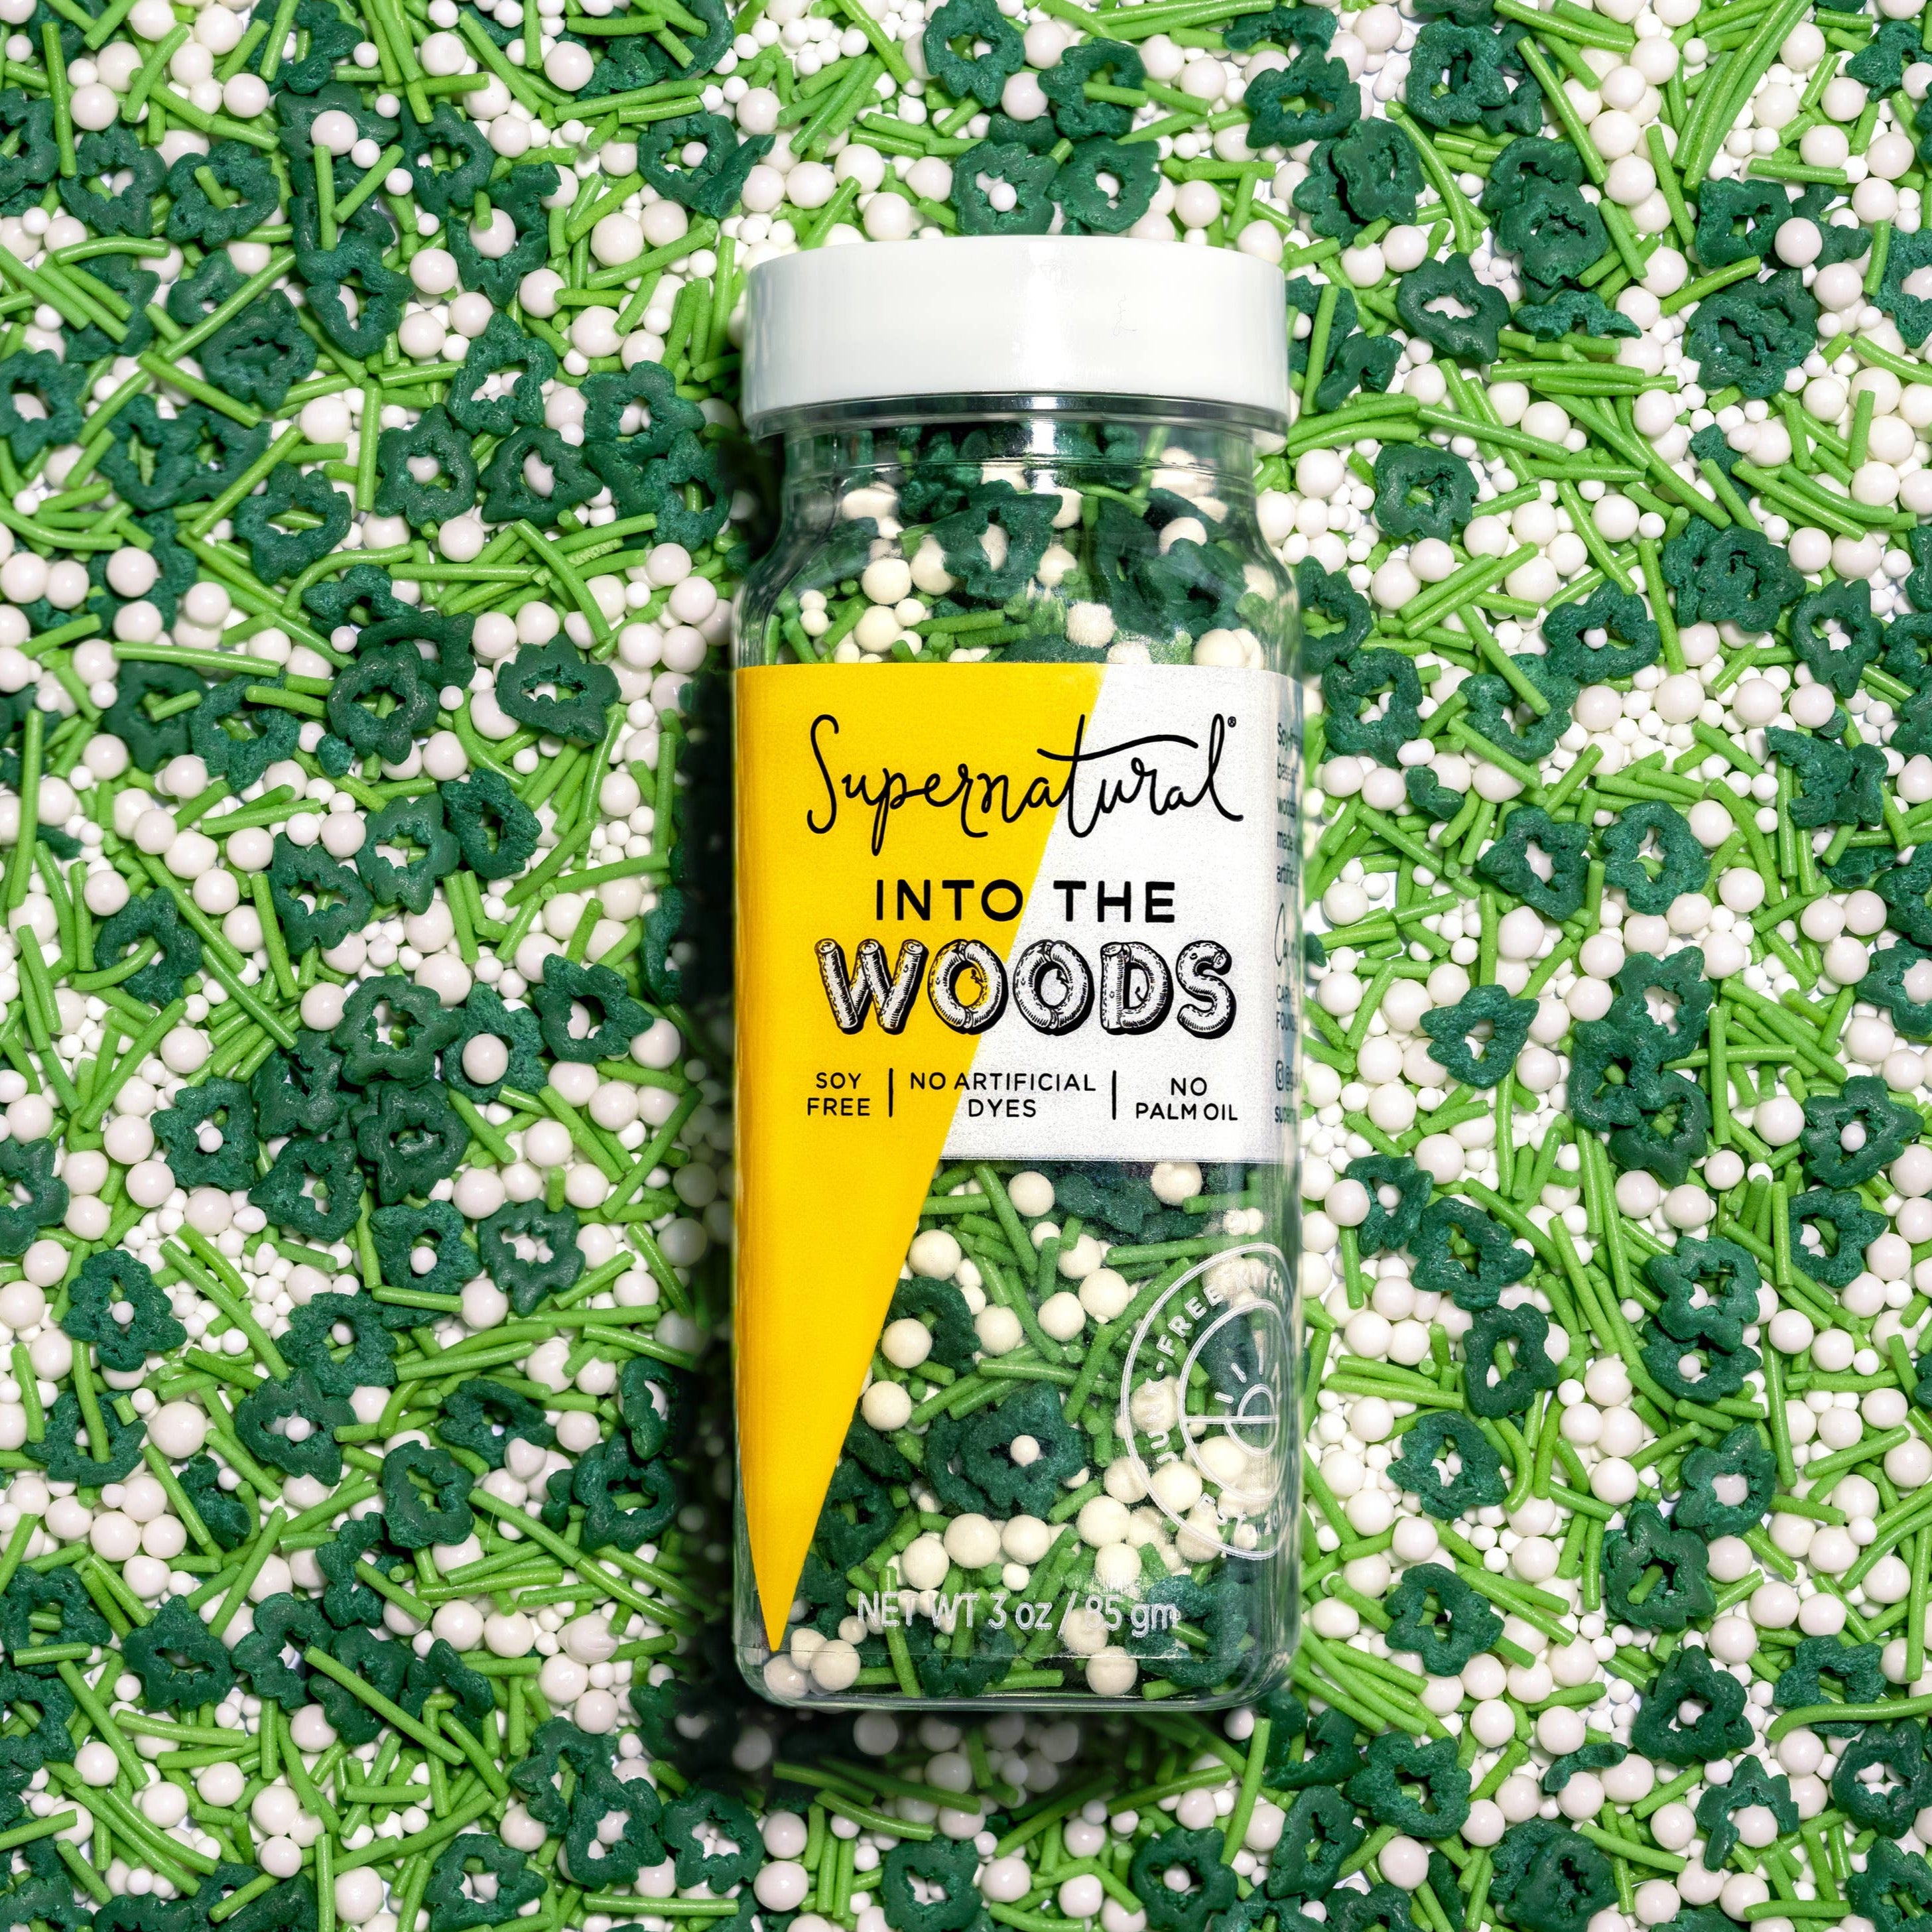 Dye-Free Into The Woods Sprinkles